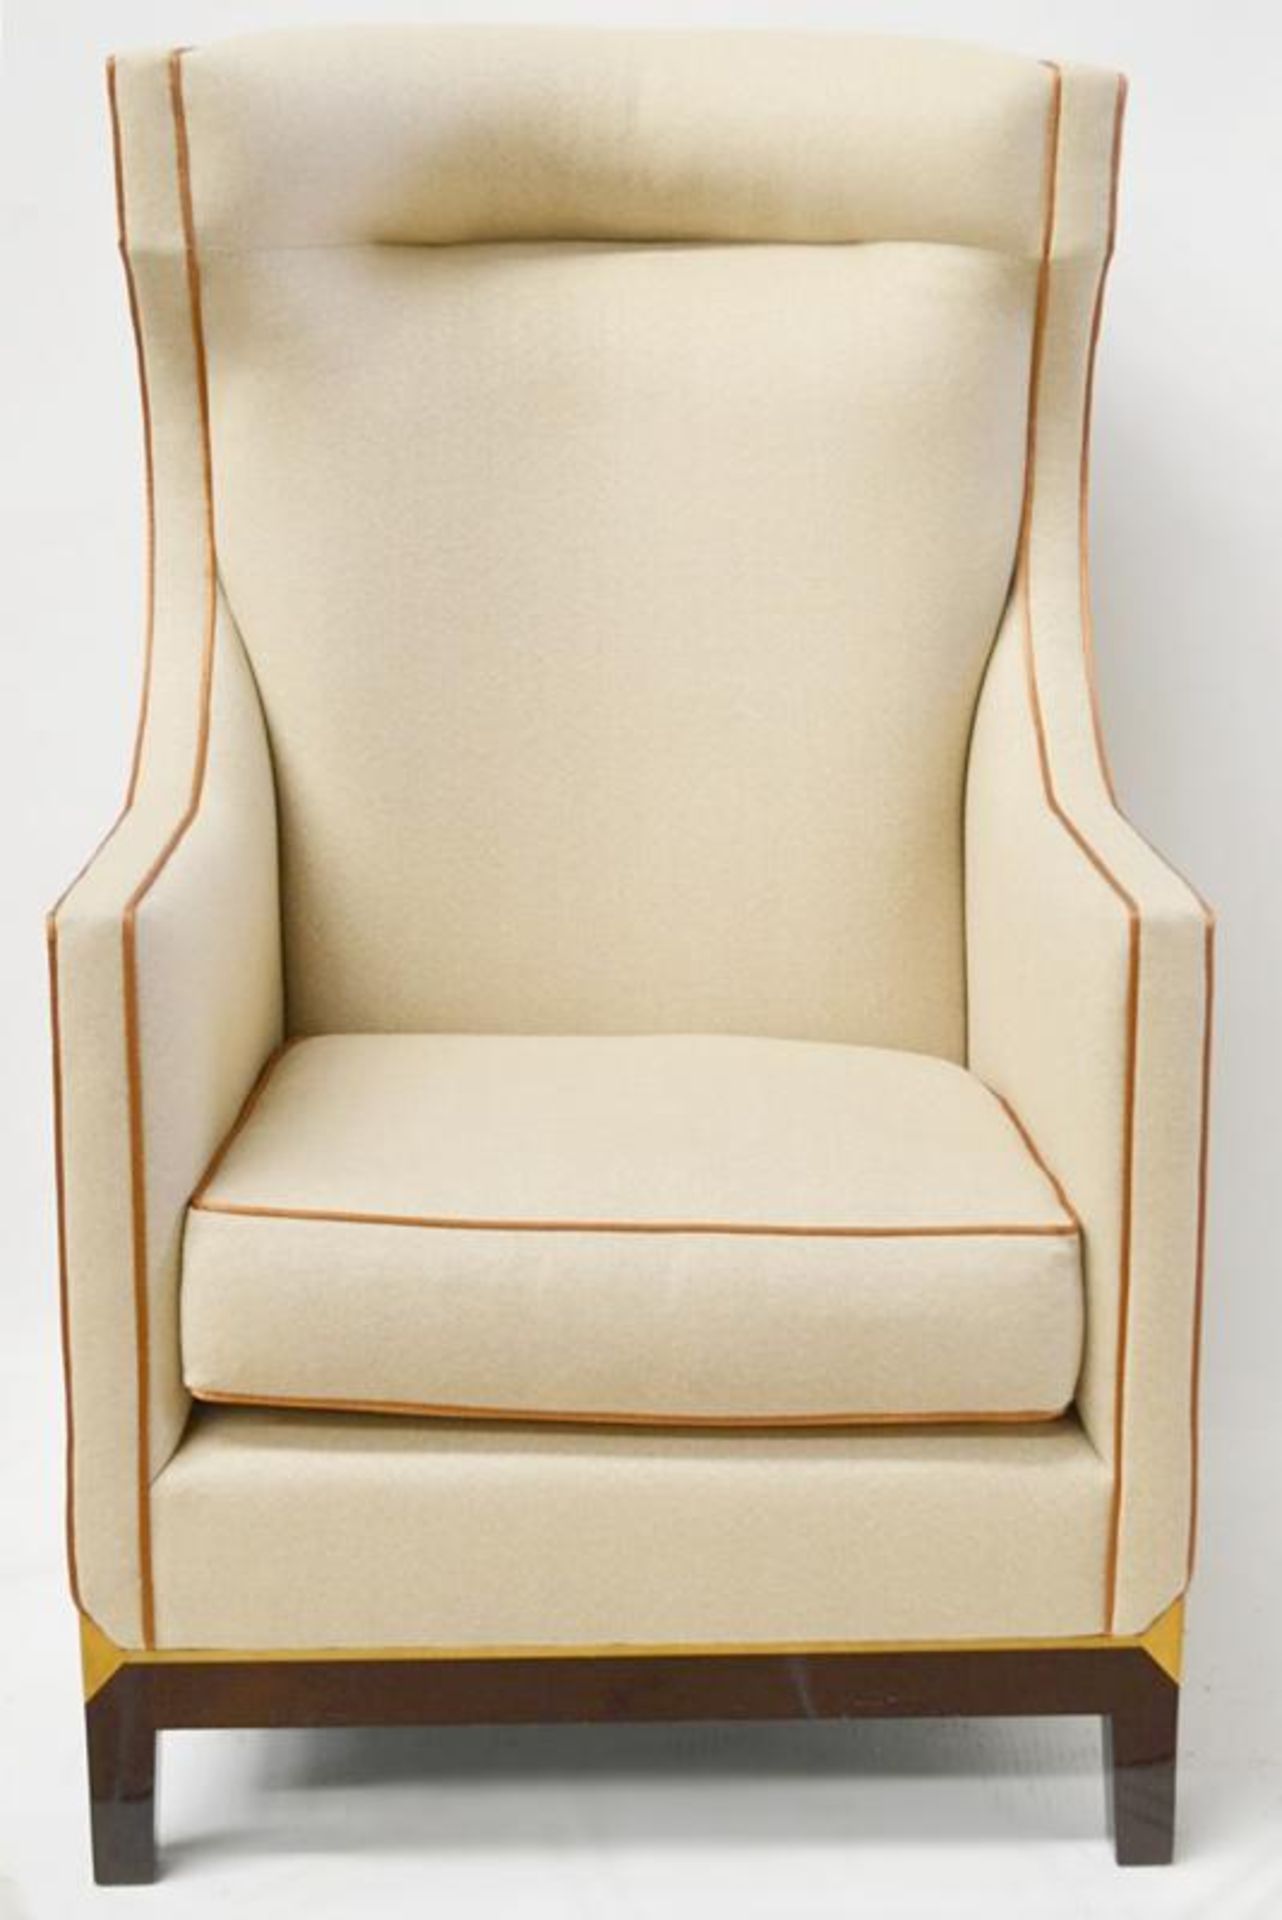 1 x Artistic Upholstery Ltd 'Burlington' Wing Back Chair With Matching Stool - RRP £7,358.00 - Image 4 of 10